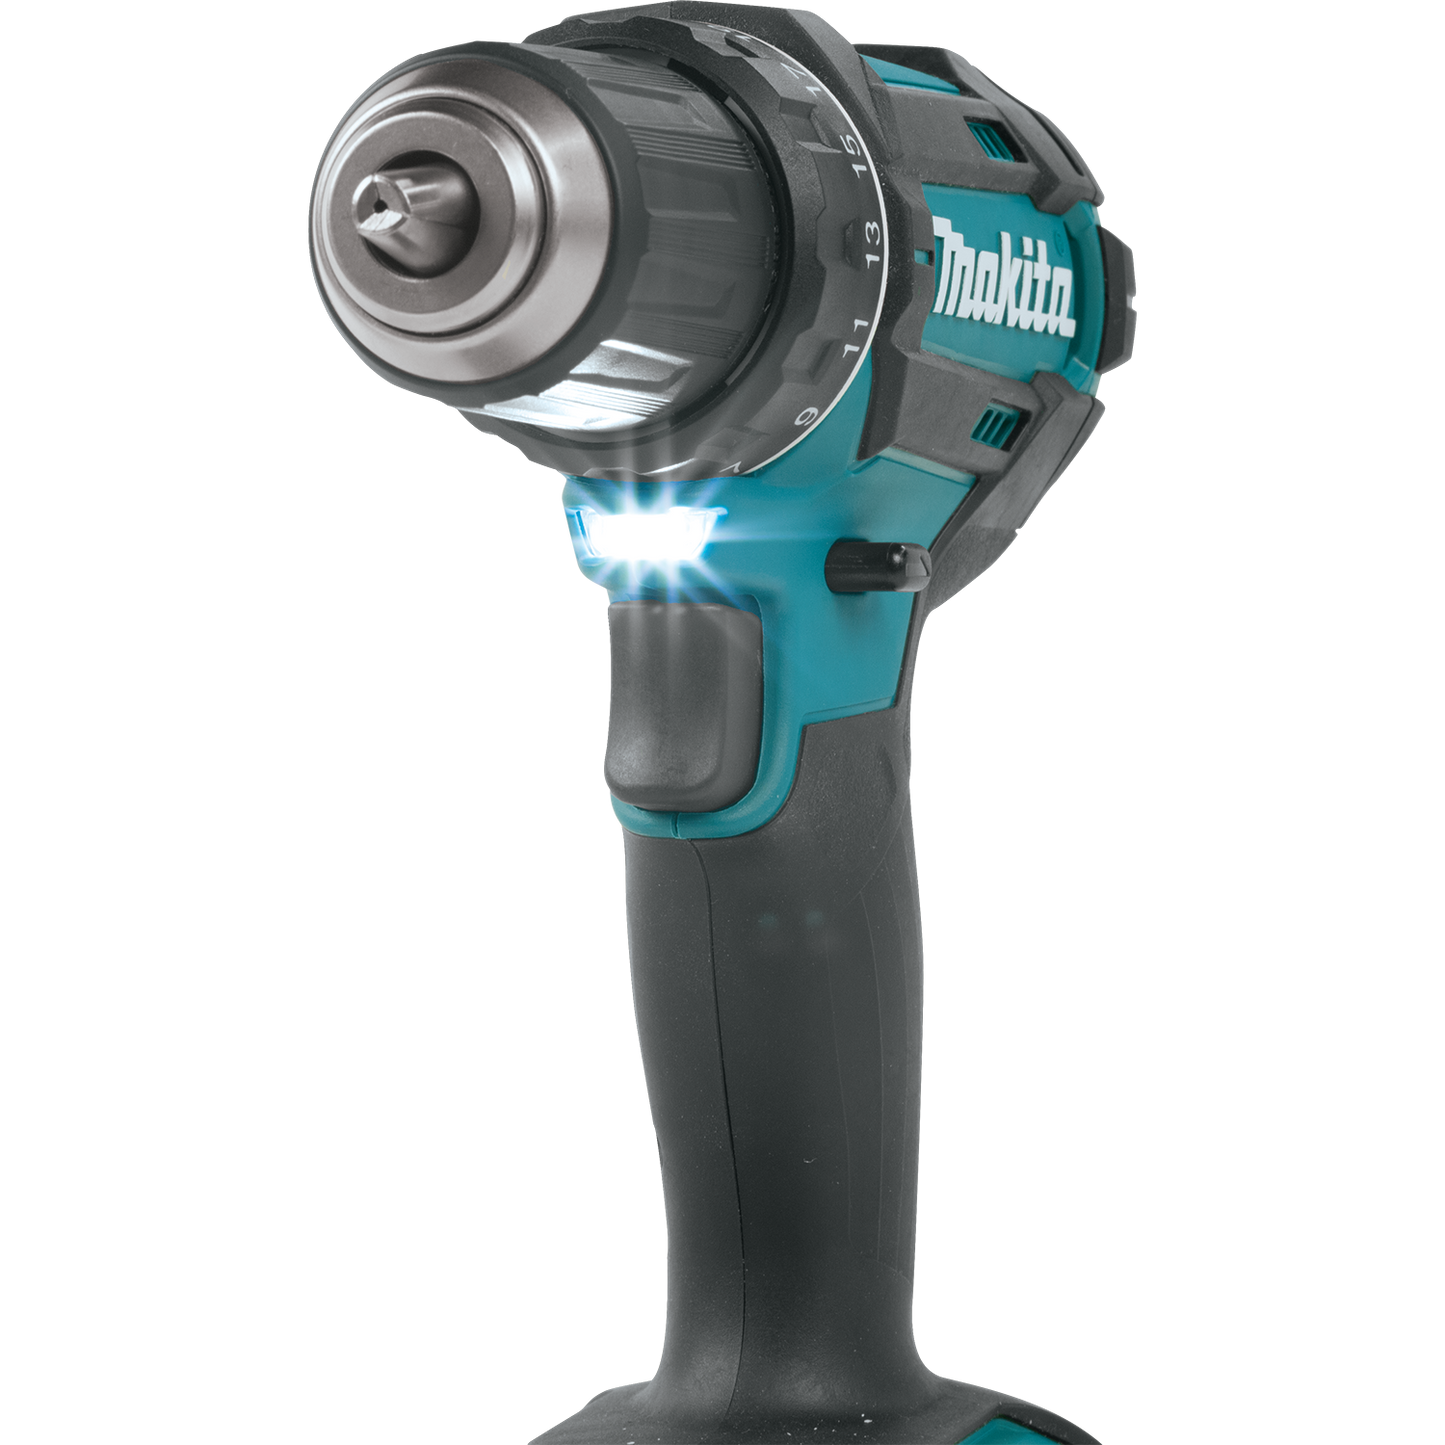 Makita 18 Volt LXT Lithium Ion Cordless 1/2 Inch Driver Drill Factory Serviced (Tool Only)